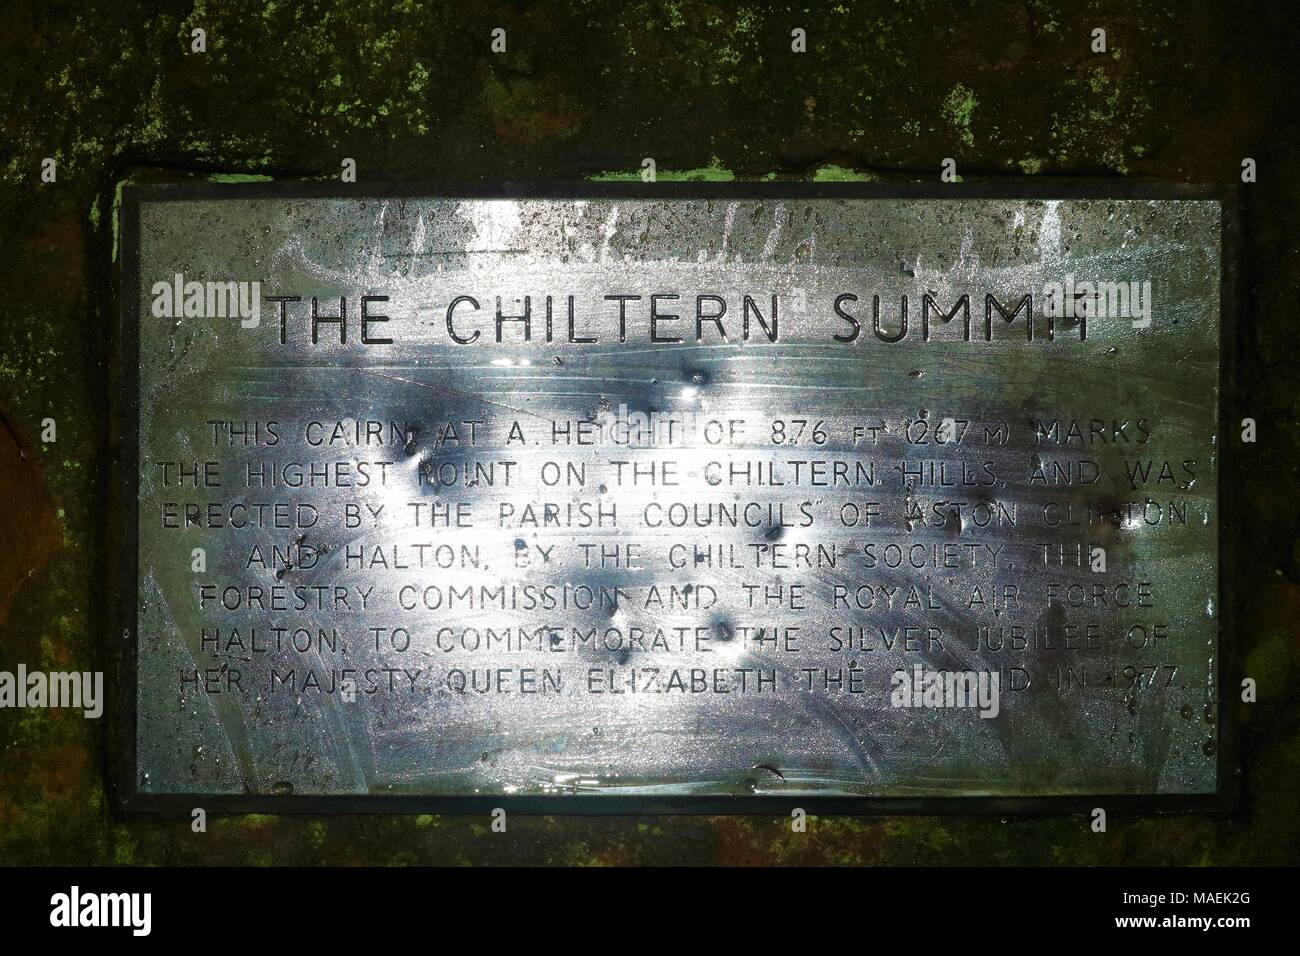 The Chiltern Summit' plaque on rocks at Wendover Woods, Wendover, Buckinghamshire, UK Stock Photo